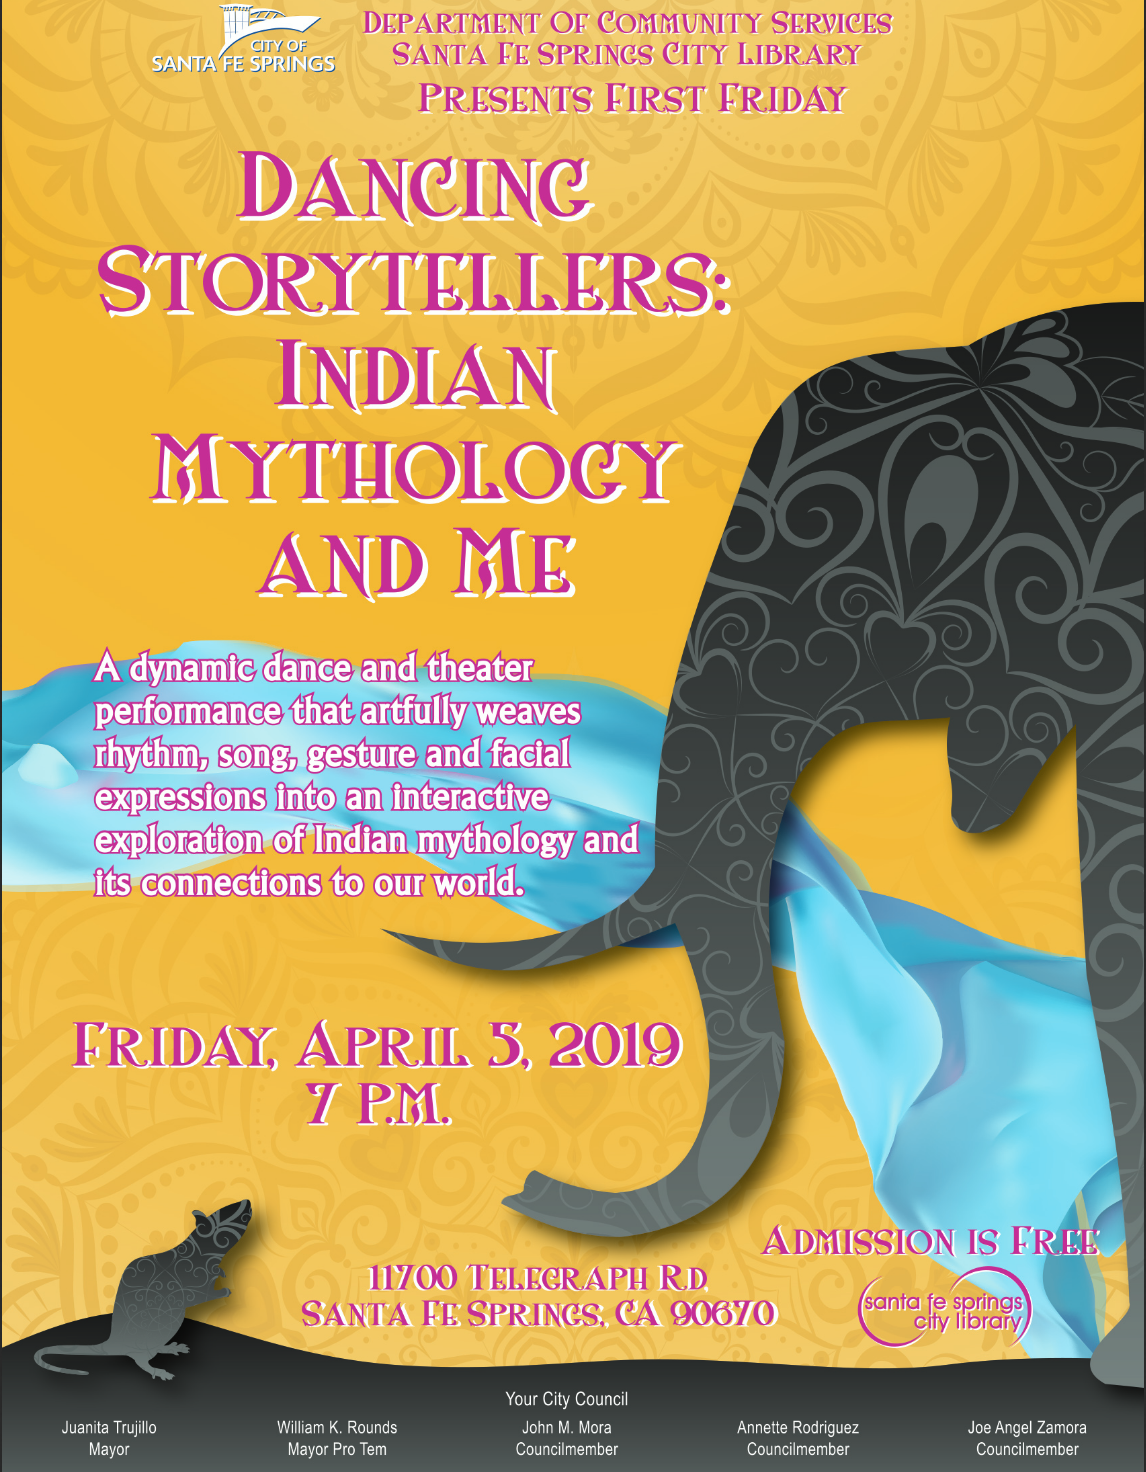 Department of Community Services and Santa Fe Springs City Library Present First friday
Featuring The Dancing Storytellers’ “Indian Mythology and Me”
Friday April 5, 2019, 7pm

Indian Mythology and Me is a dynamic dance and theater performance that artfully weaves rhythm, song, gesture and facial expressions into an interactive exploration of Indian Mythology and its connections to our world today.

Santa Fe Springs Library
11700 Telegraph Rd.
Santa Fe Springs, CA 90670
Admission is free and includes free refreshments
(562) 868-7738
